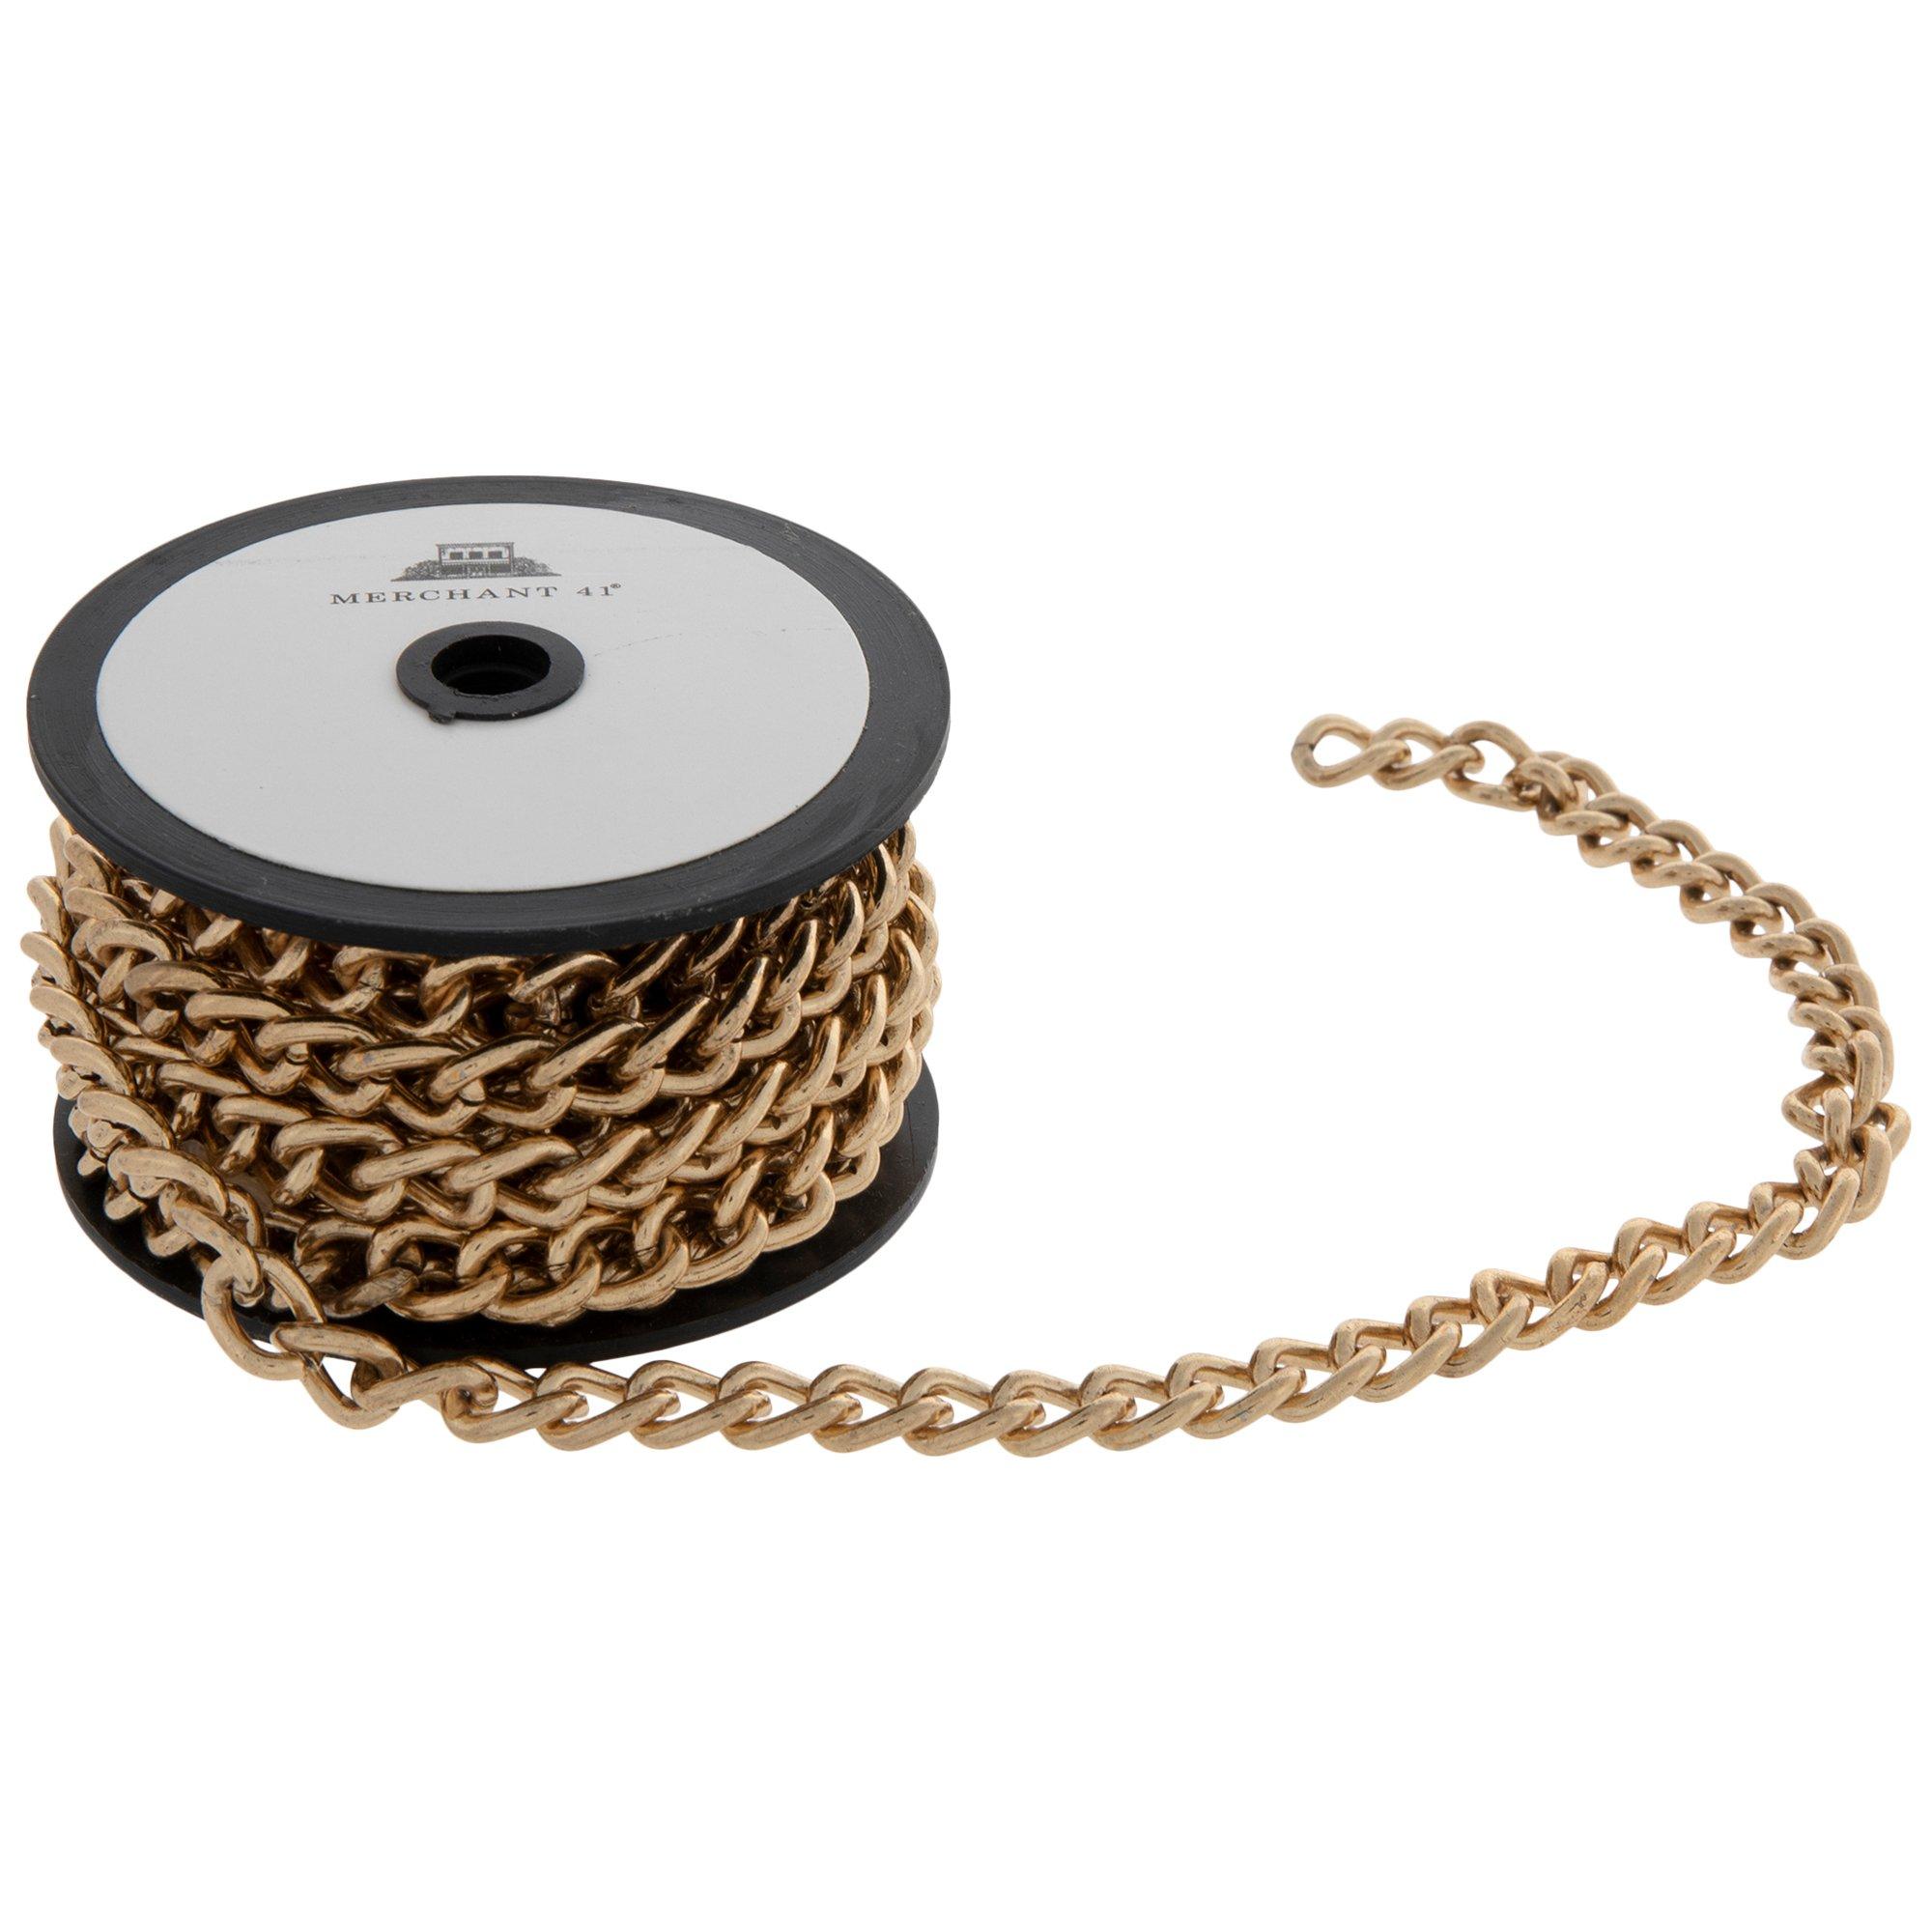 Campbell #200 49 Ft. Brass-Plated Metal Craft Chain 0712017, 1 - Kroger